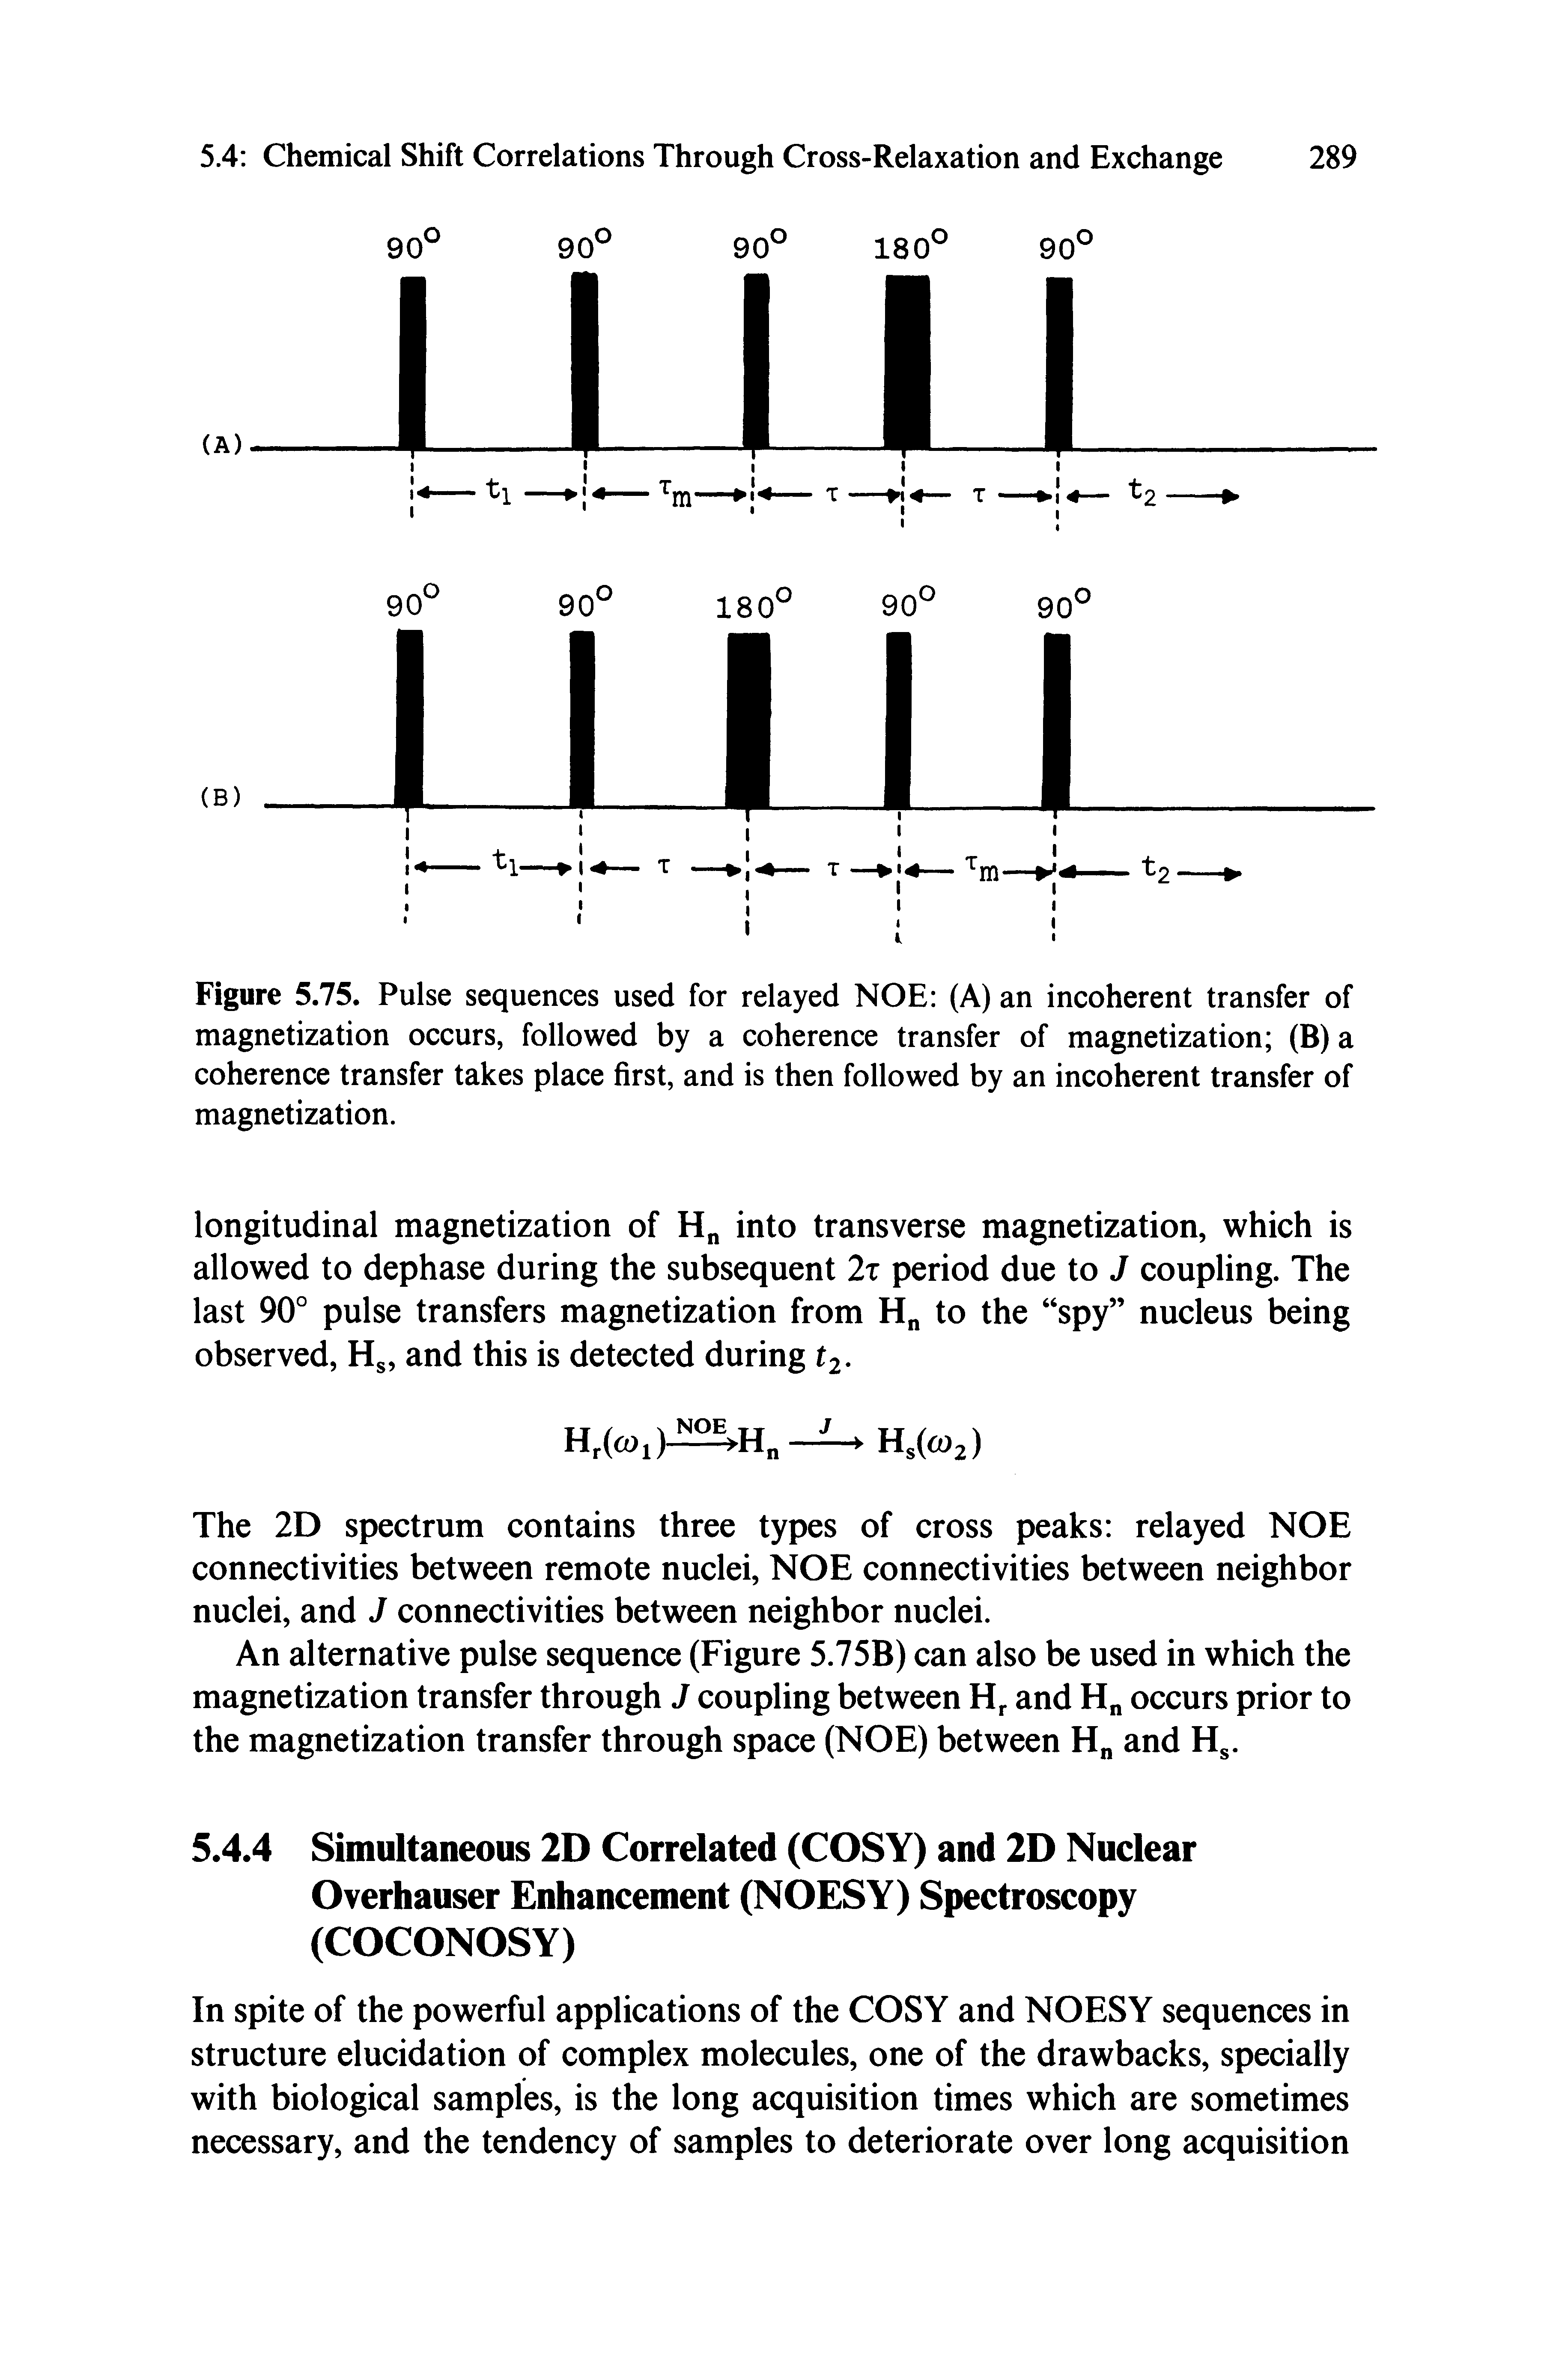 Figure 5.75. Pulse sequences used for relayed NOE (A) an incoherent transfer of magnetization occurs, followed by a coherence transfer of magnetization (B)a coherence transfer takes place first, and is then followed by an incoherent transfer of magnetization.